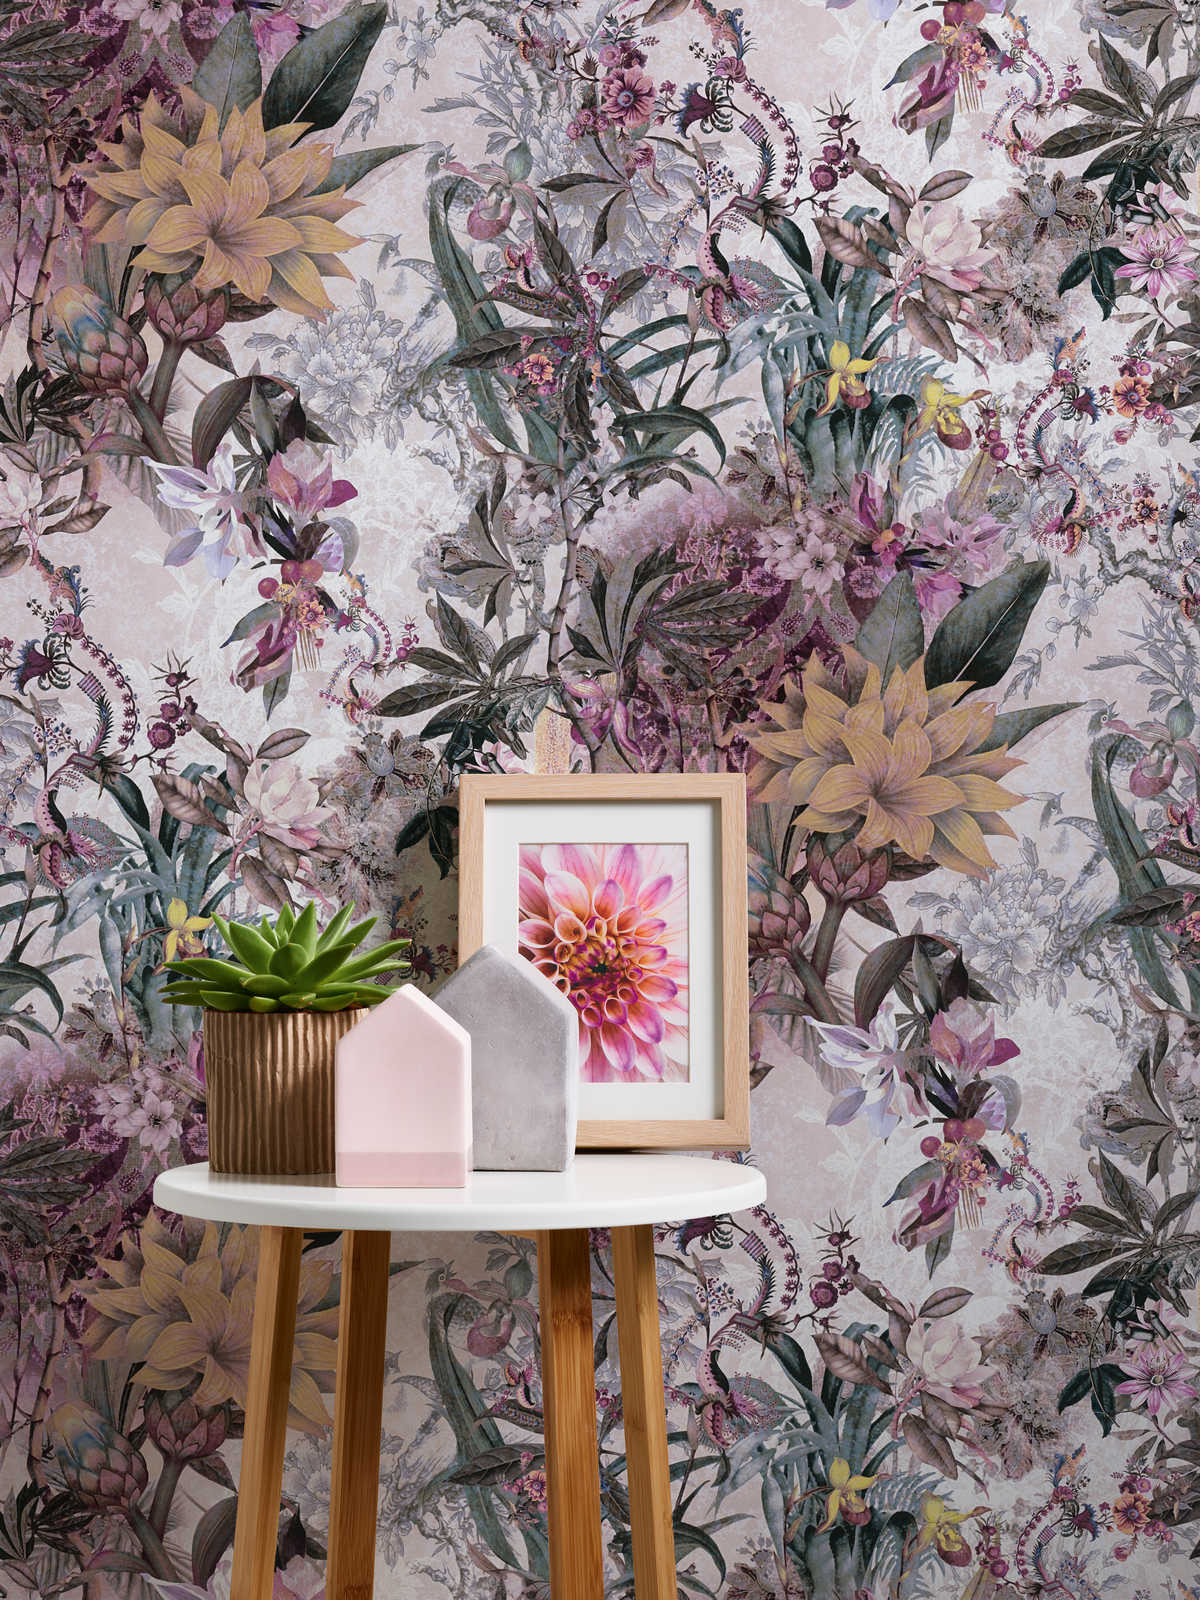             Motif wallpaper flowers design with floral pattern - multicoloured
        